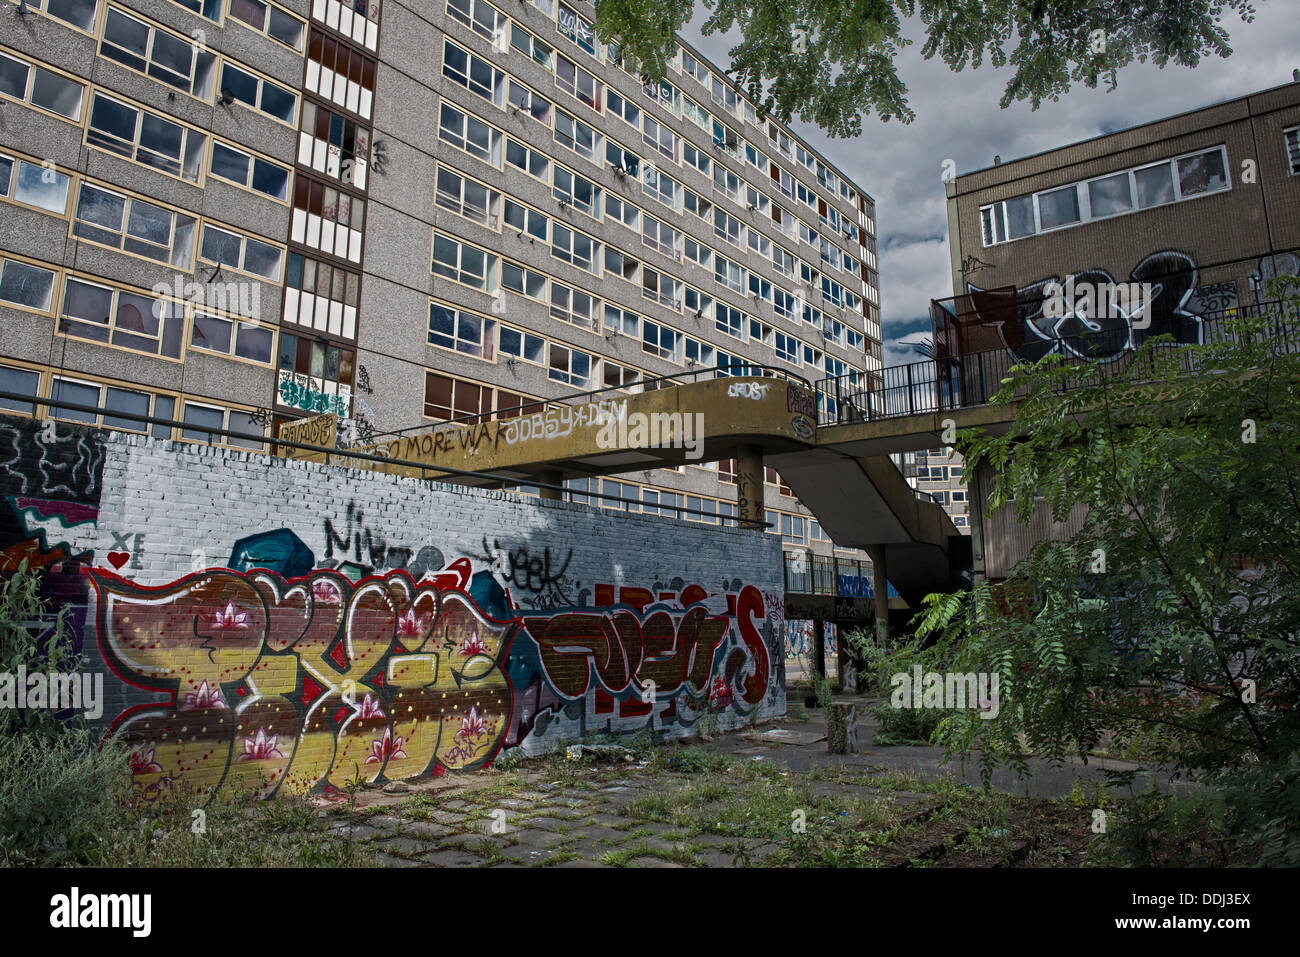 The Heygate Estate is located in Walworth, Southwark, and South London. The estate is currently being demolished. Stock Photo